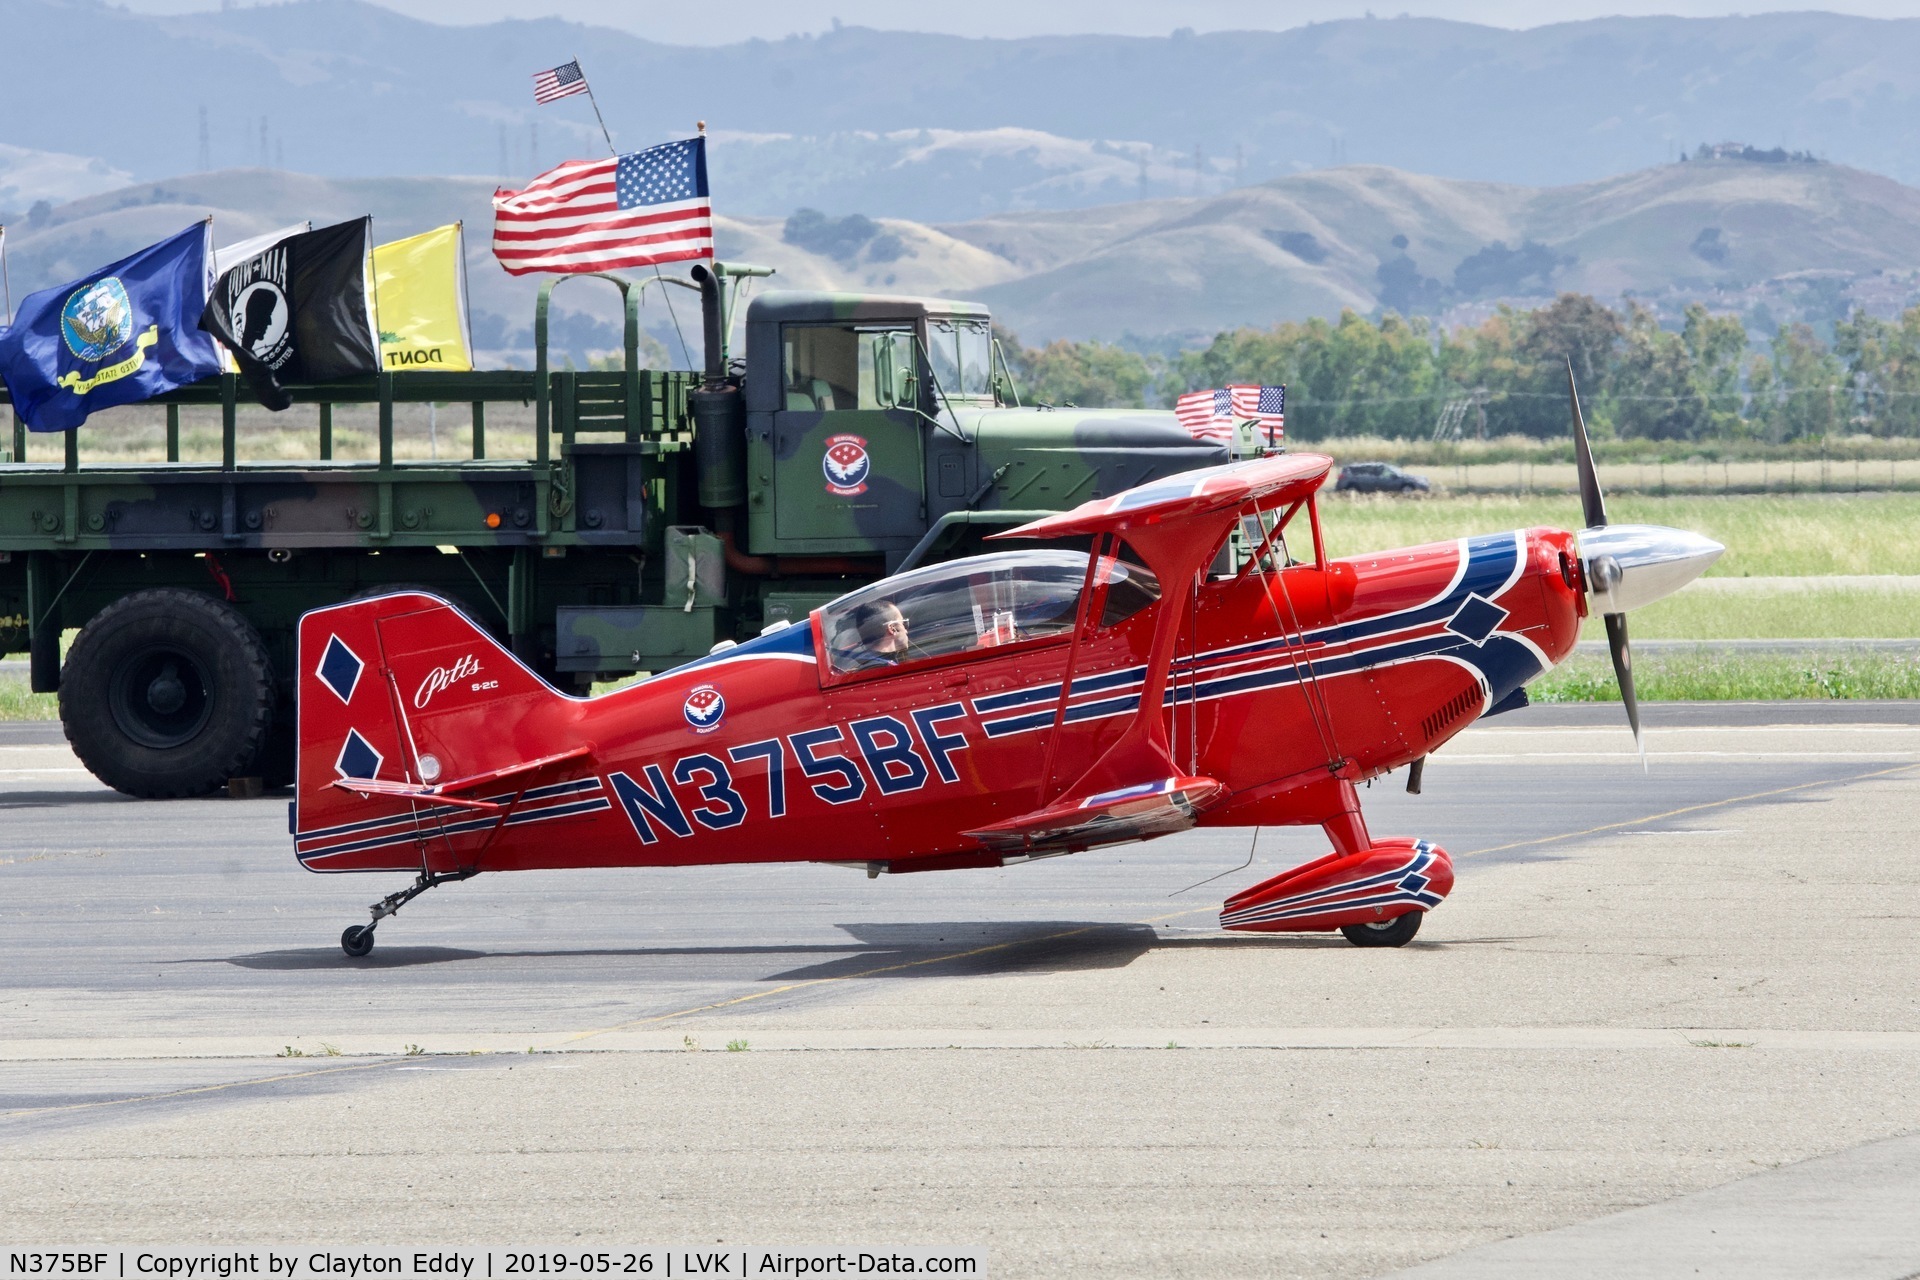 N375BF, 2005 Aviat Pitts S-2C Special C/N 6071, Livermore Airport California 2019.